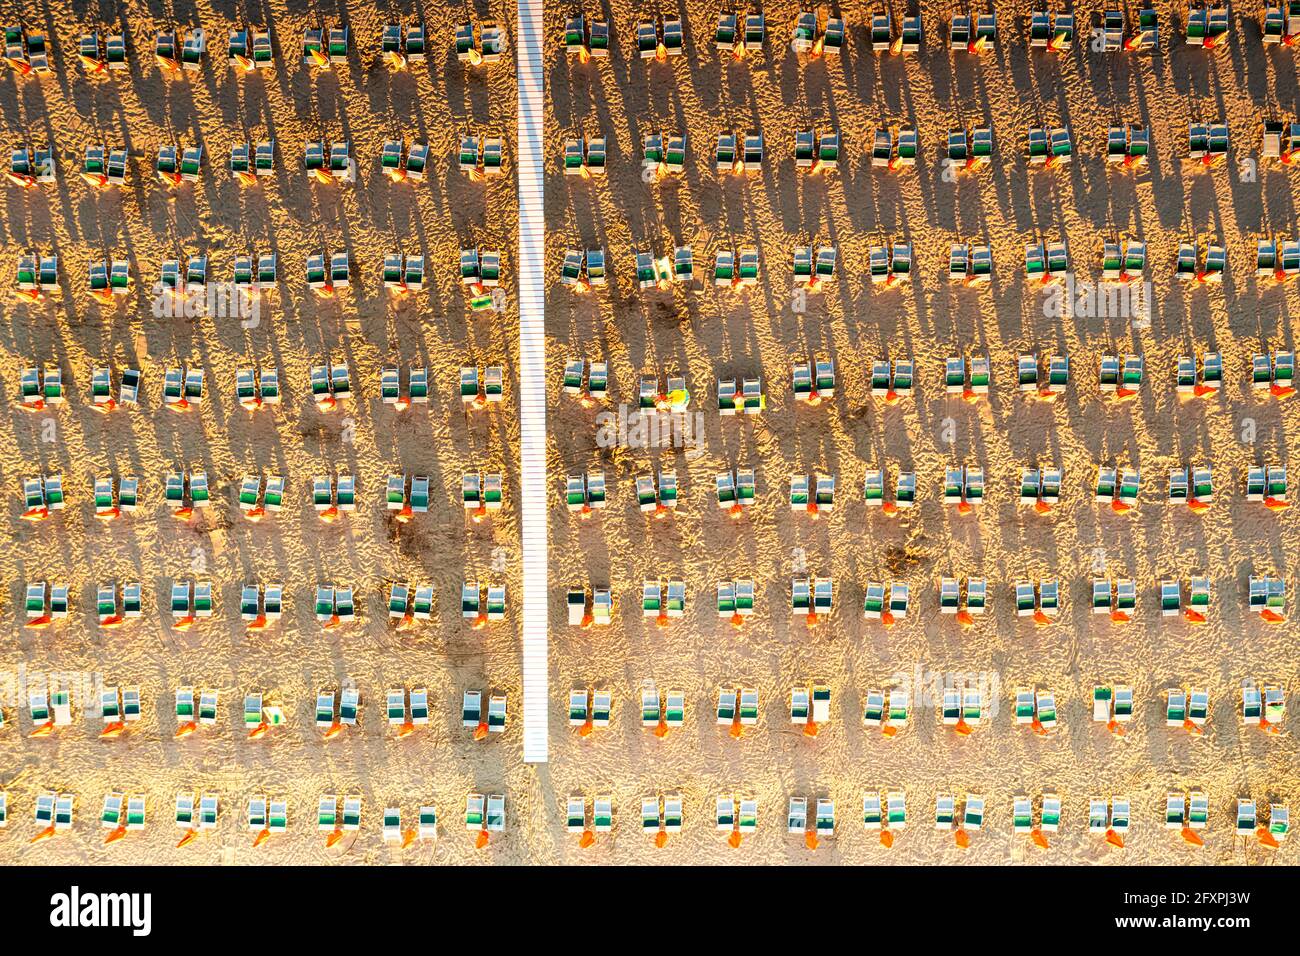 Aerial view of rows of lounge chairs and sunbeds on empty sand beach, Vieste, Foggia province, Gargano, Apulia, Italy, Europe Stock Photo